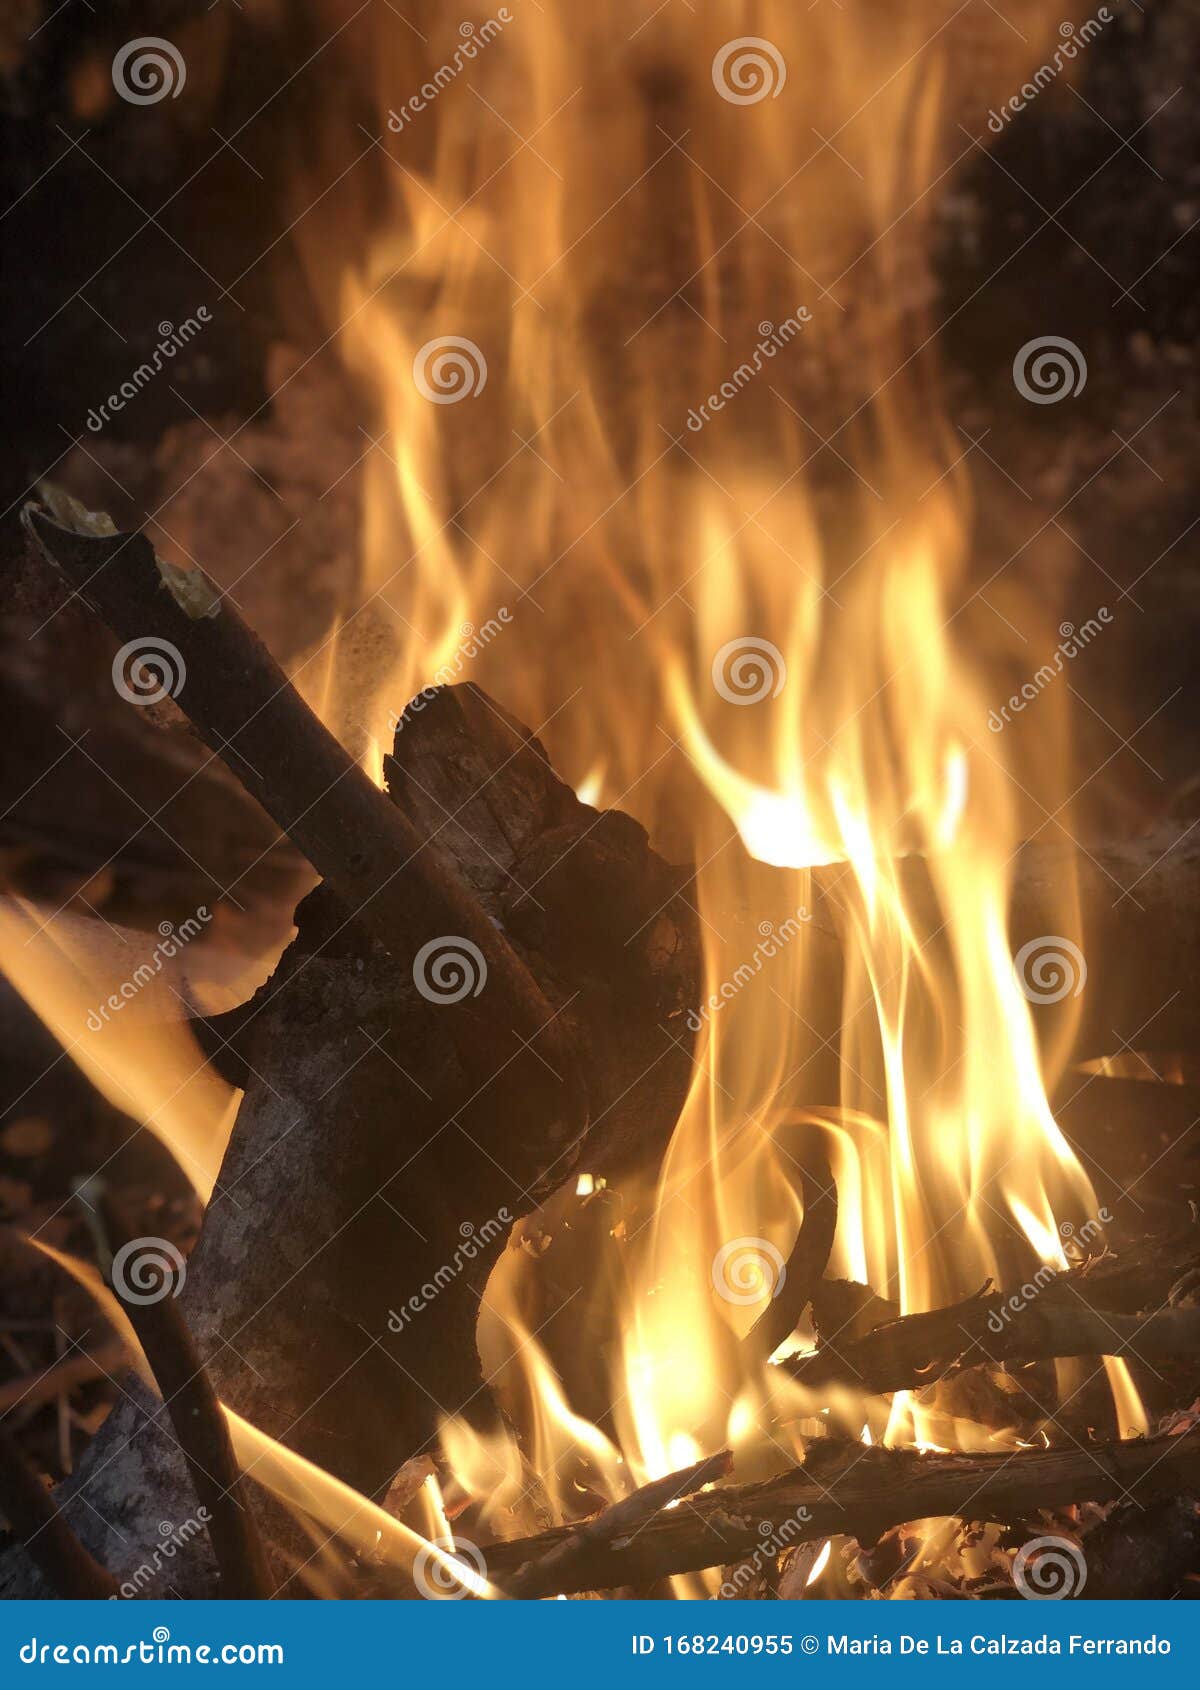 trunk burning in the fire